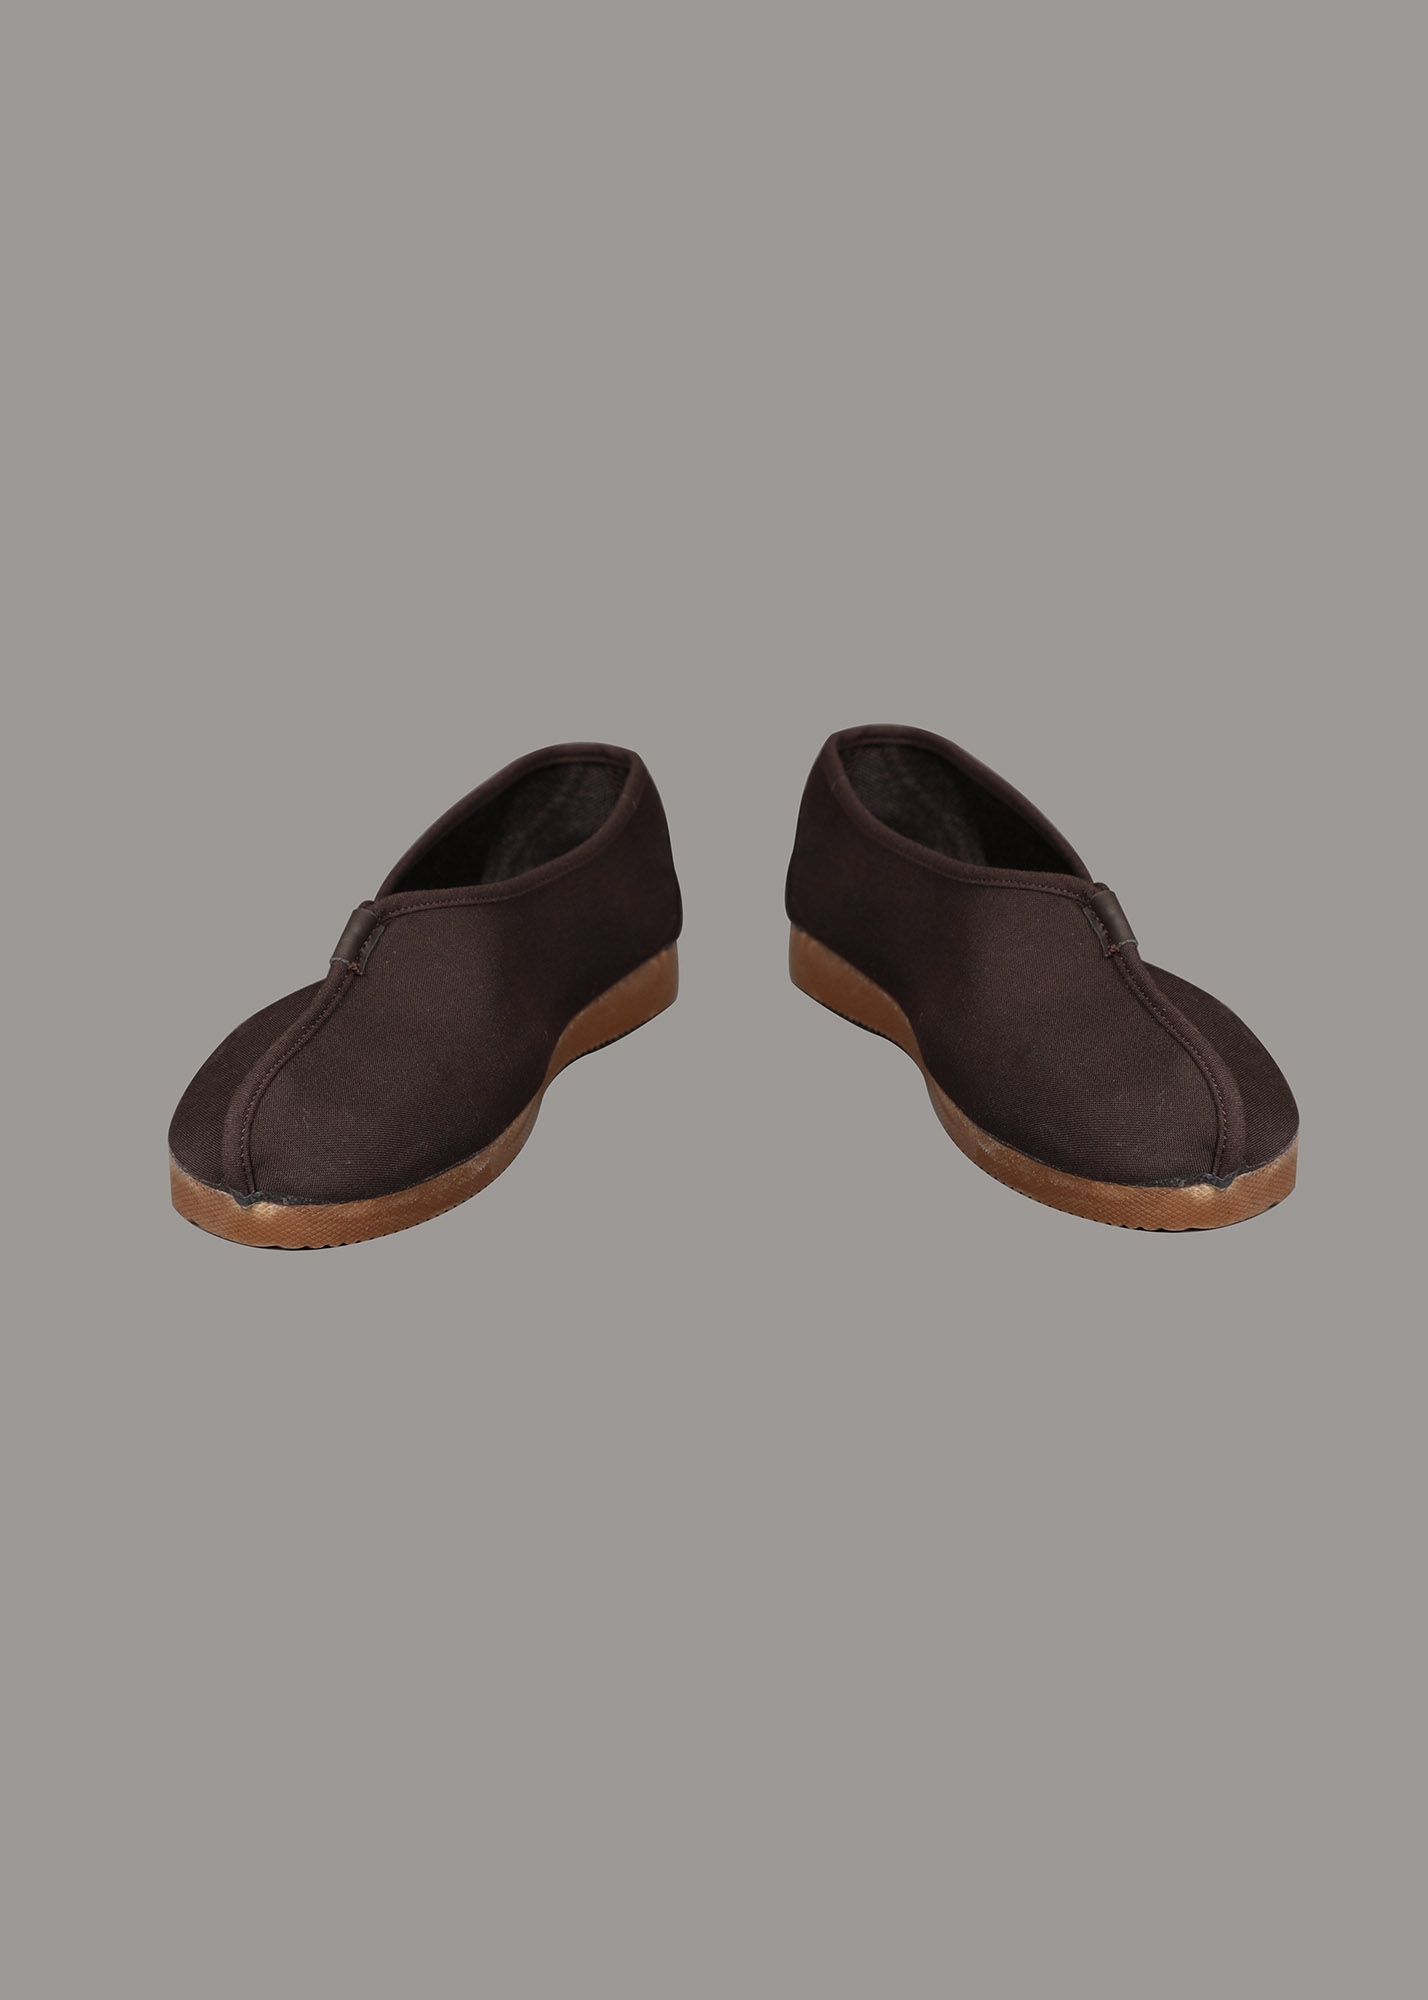 Aang Shoes Men Avatar: The Last Airbender Boots Cosplay